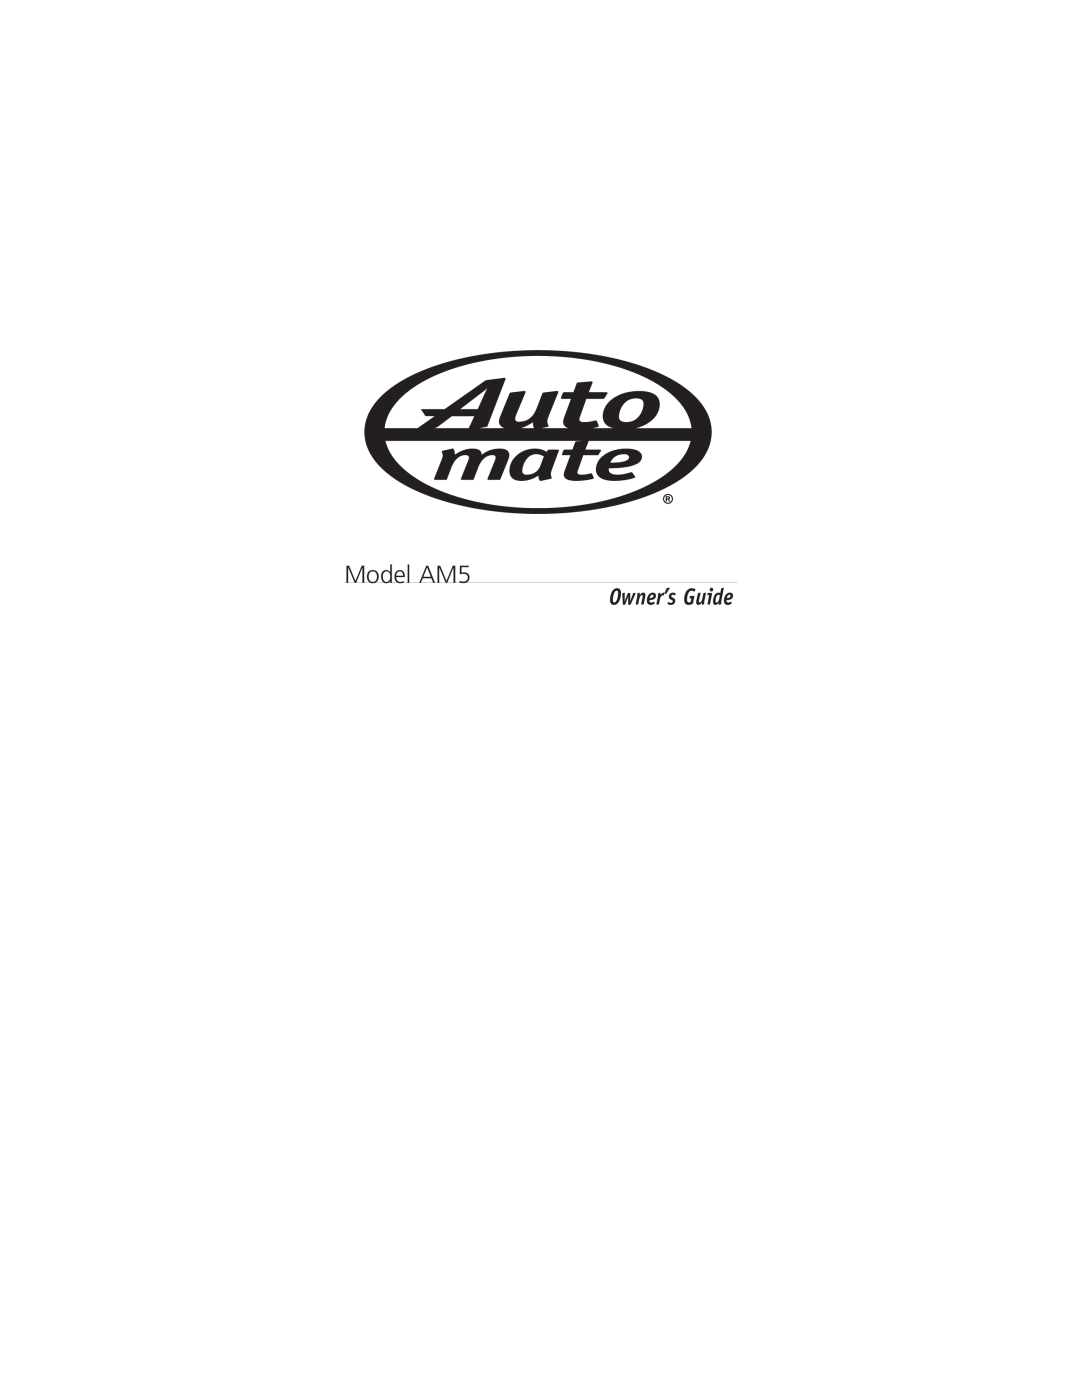 Directed Electronics manual Model AM5, Owner’s Guide 